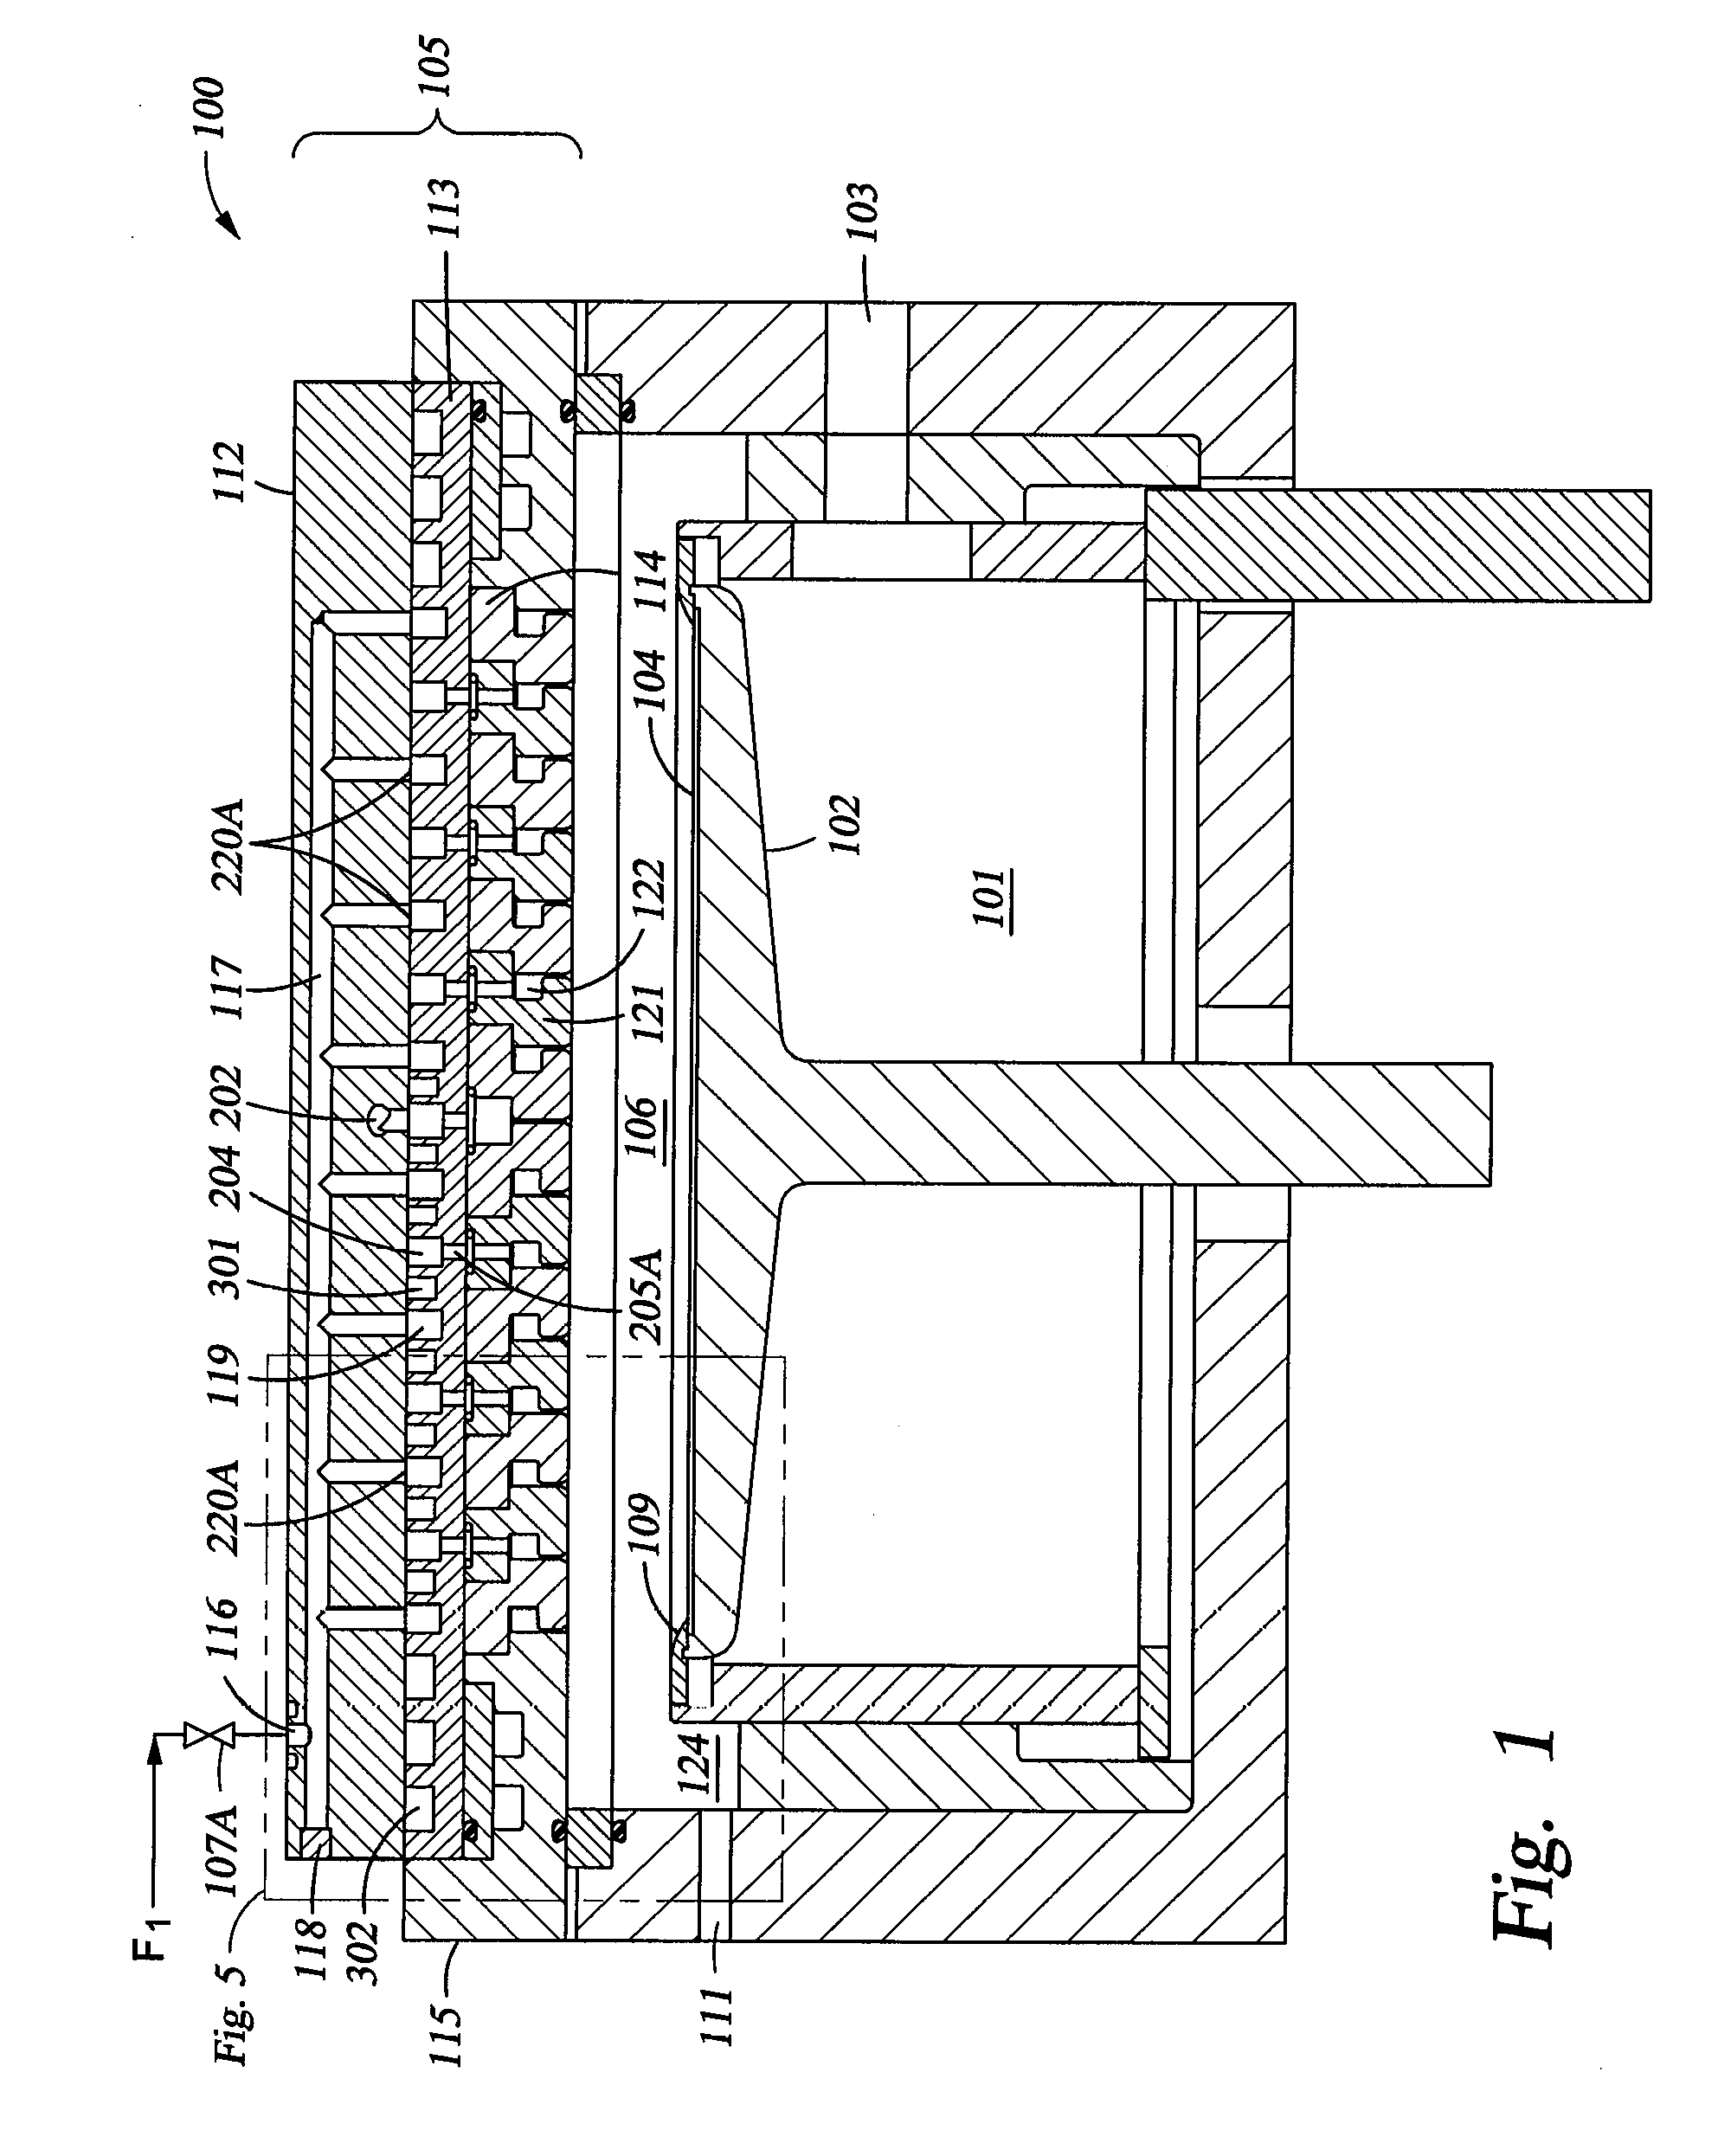 Temperature controlled multi-gas distribution assembly